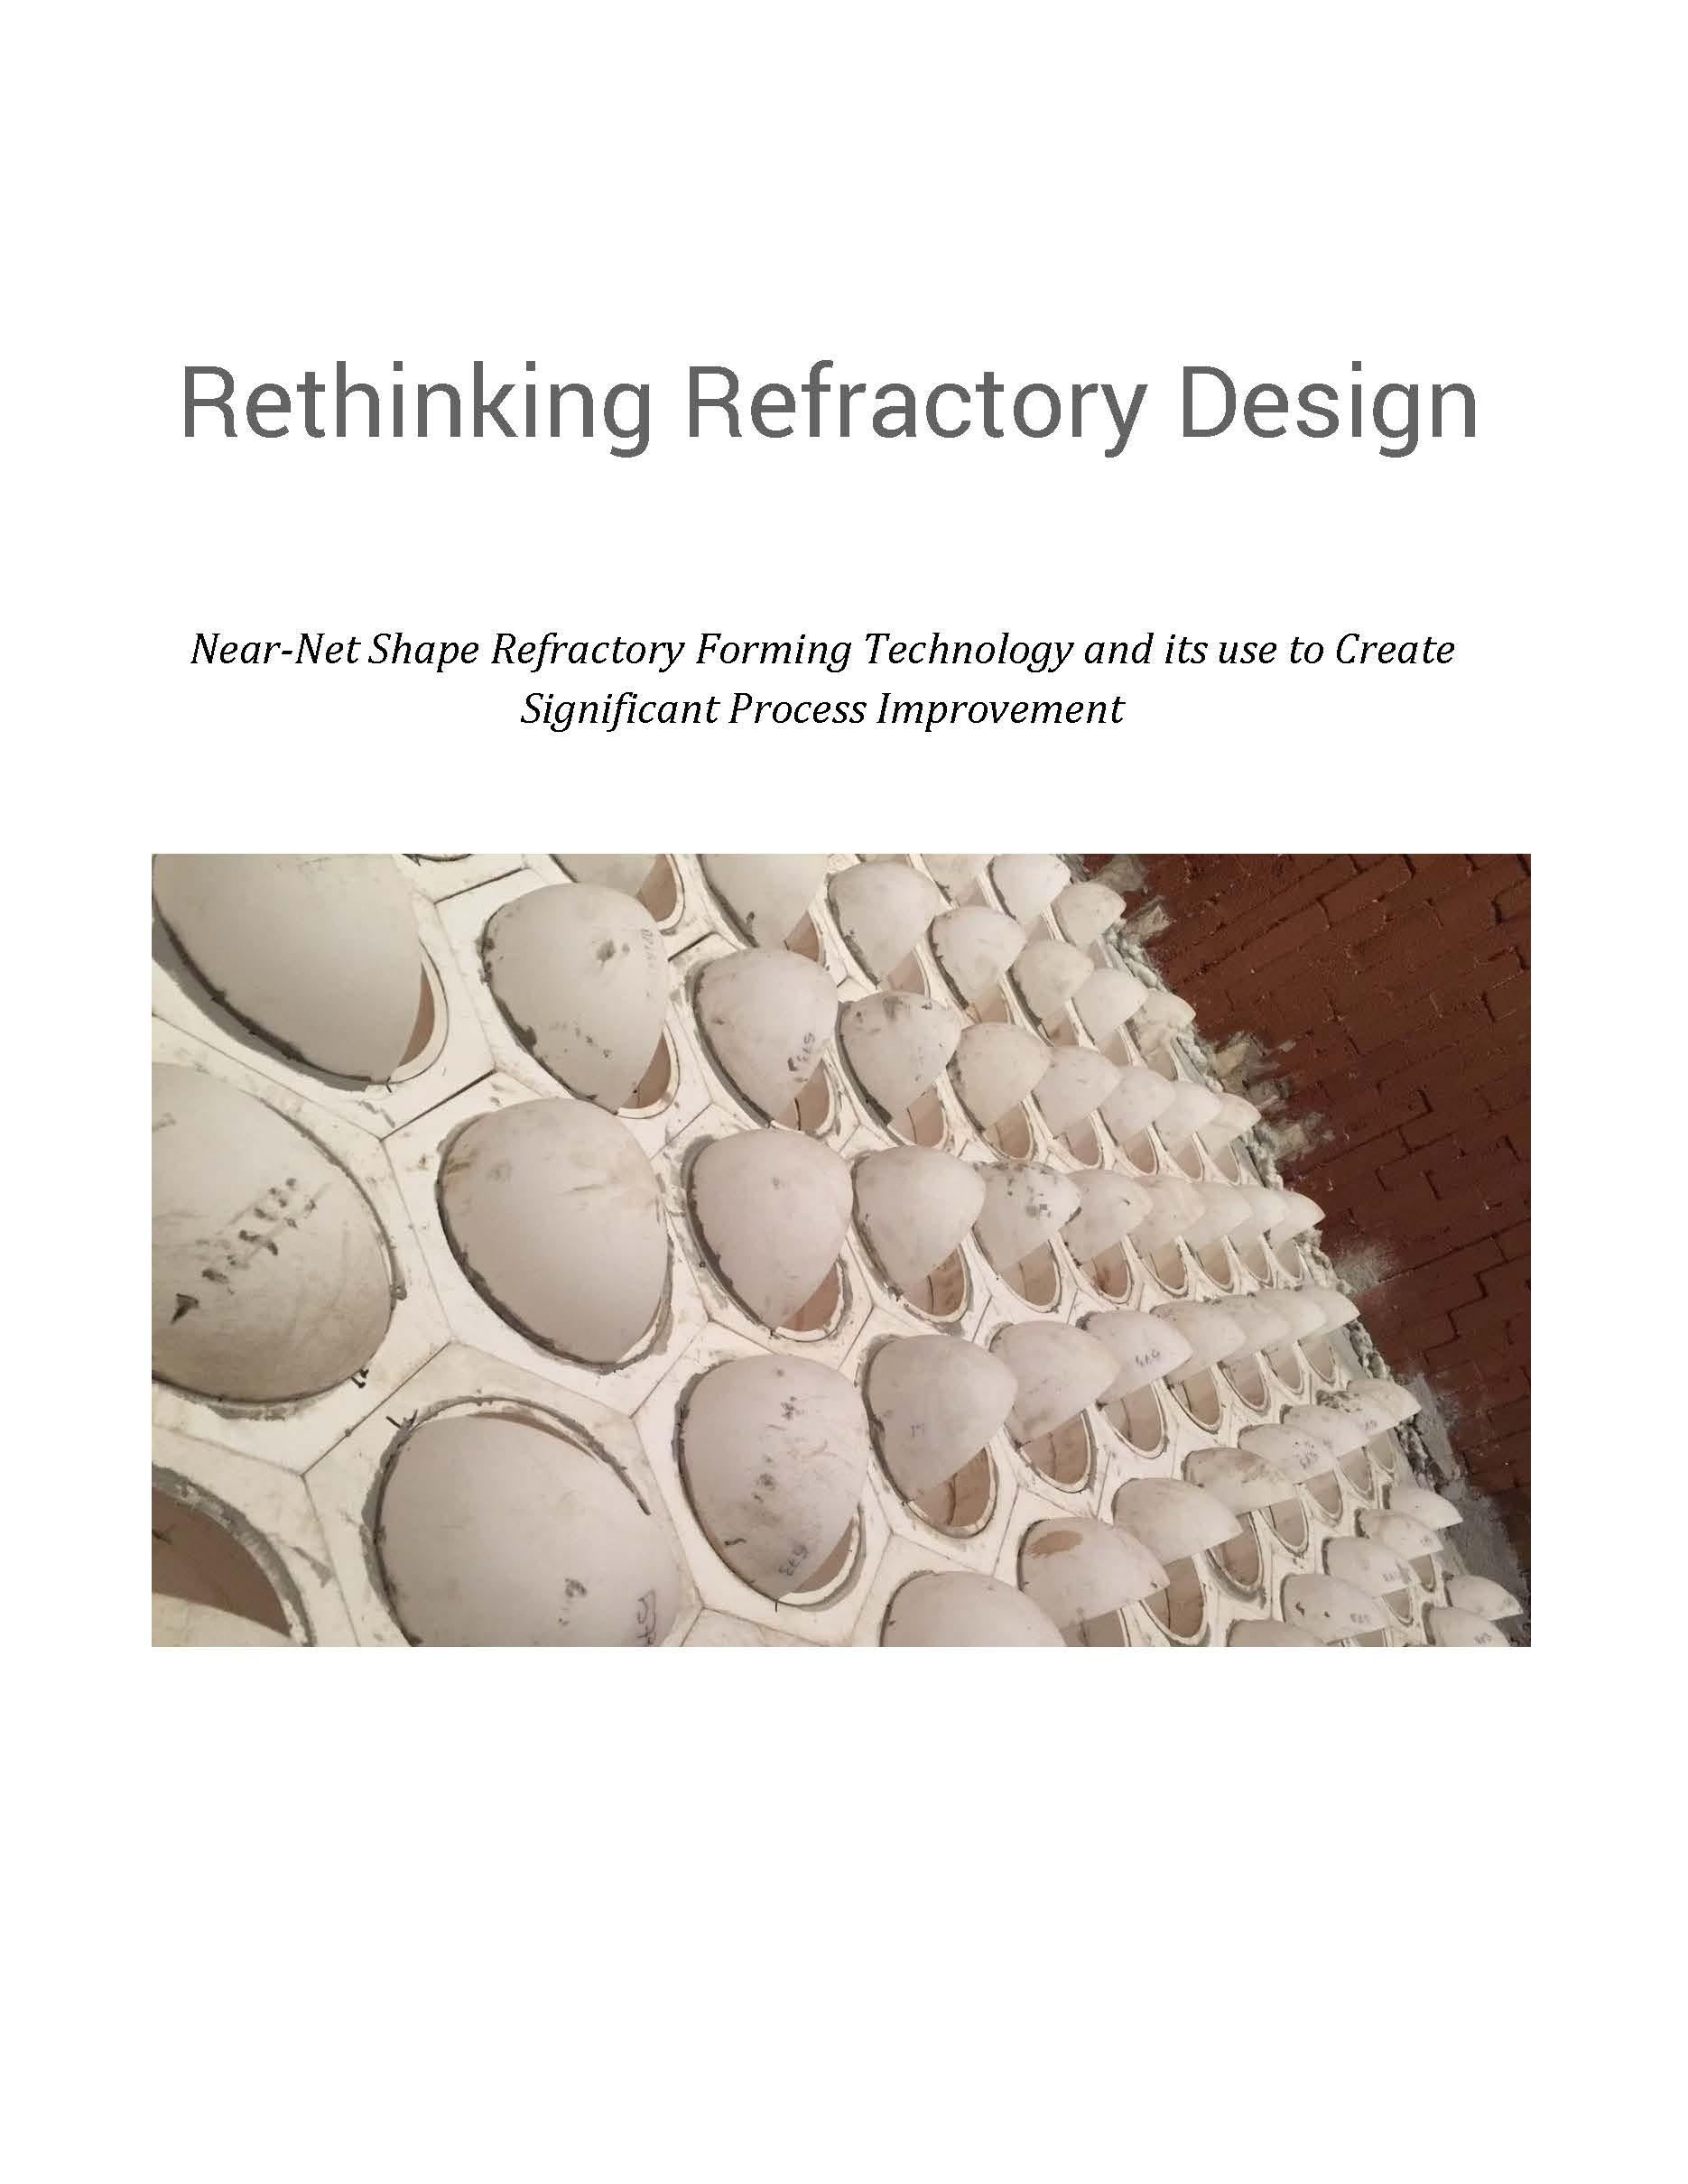 Cover page of "Rethinking Refractory Design" white paper.